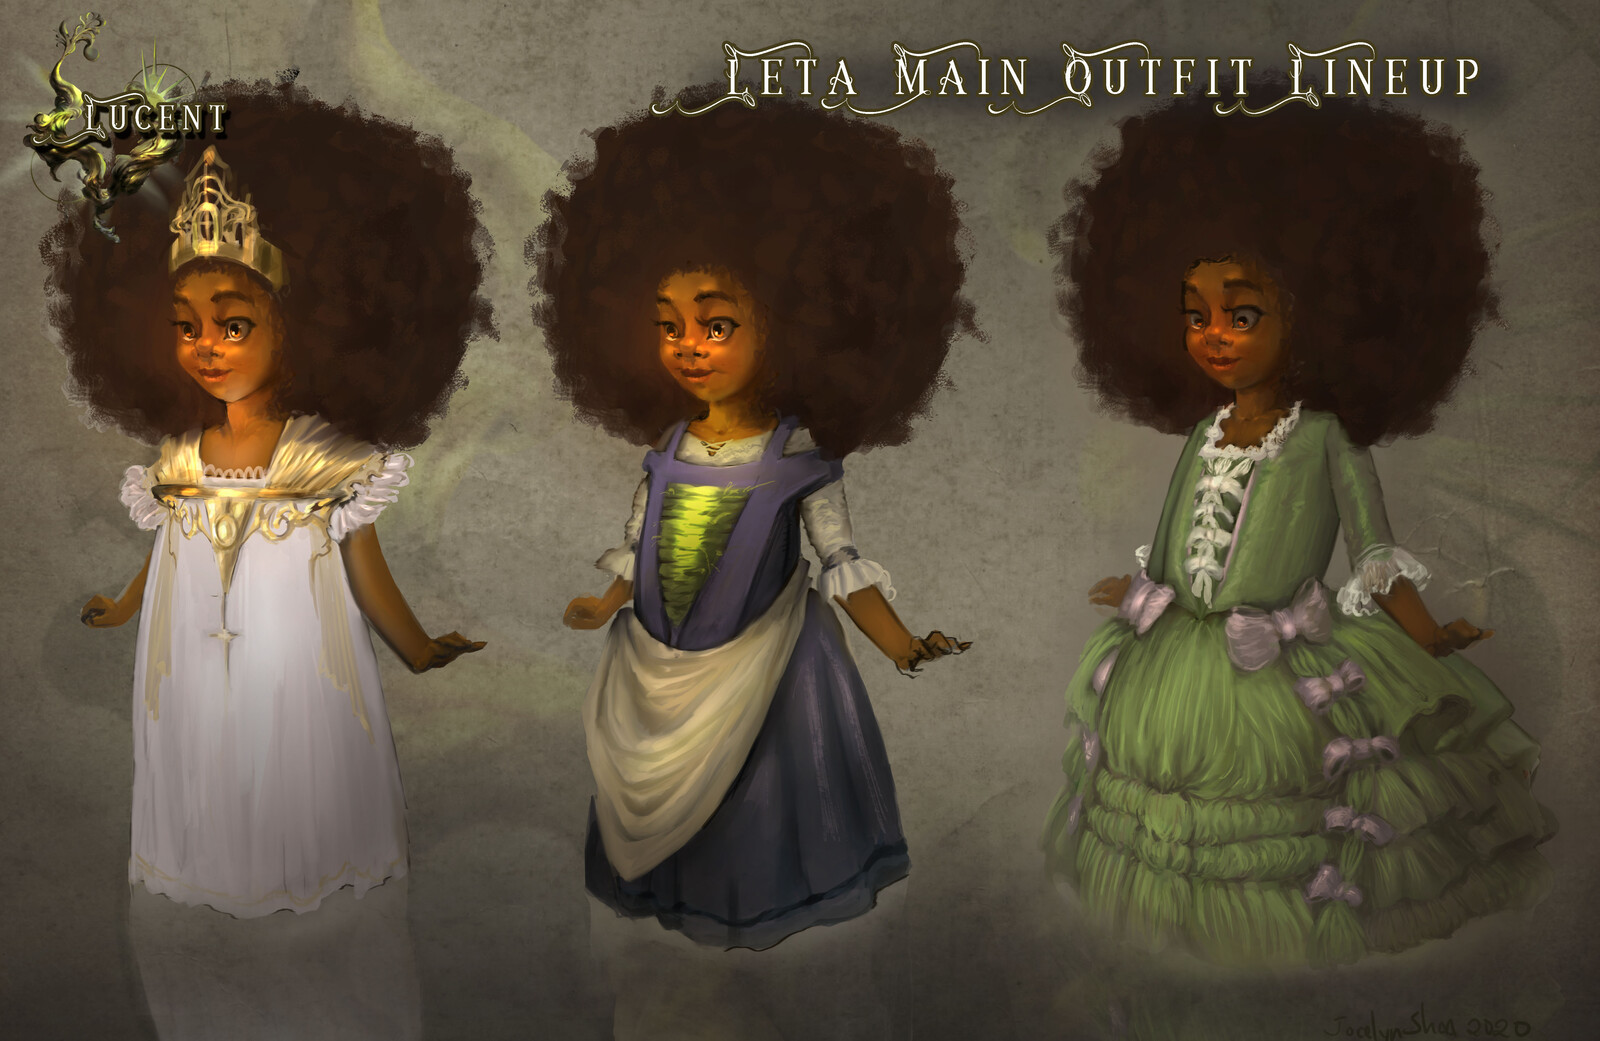 Lucent: Lucent Main Outfit Lineup